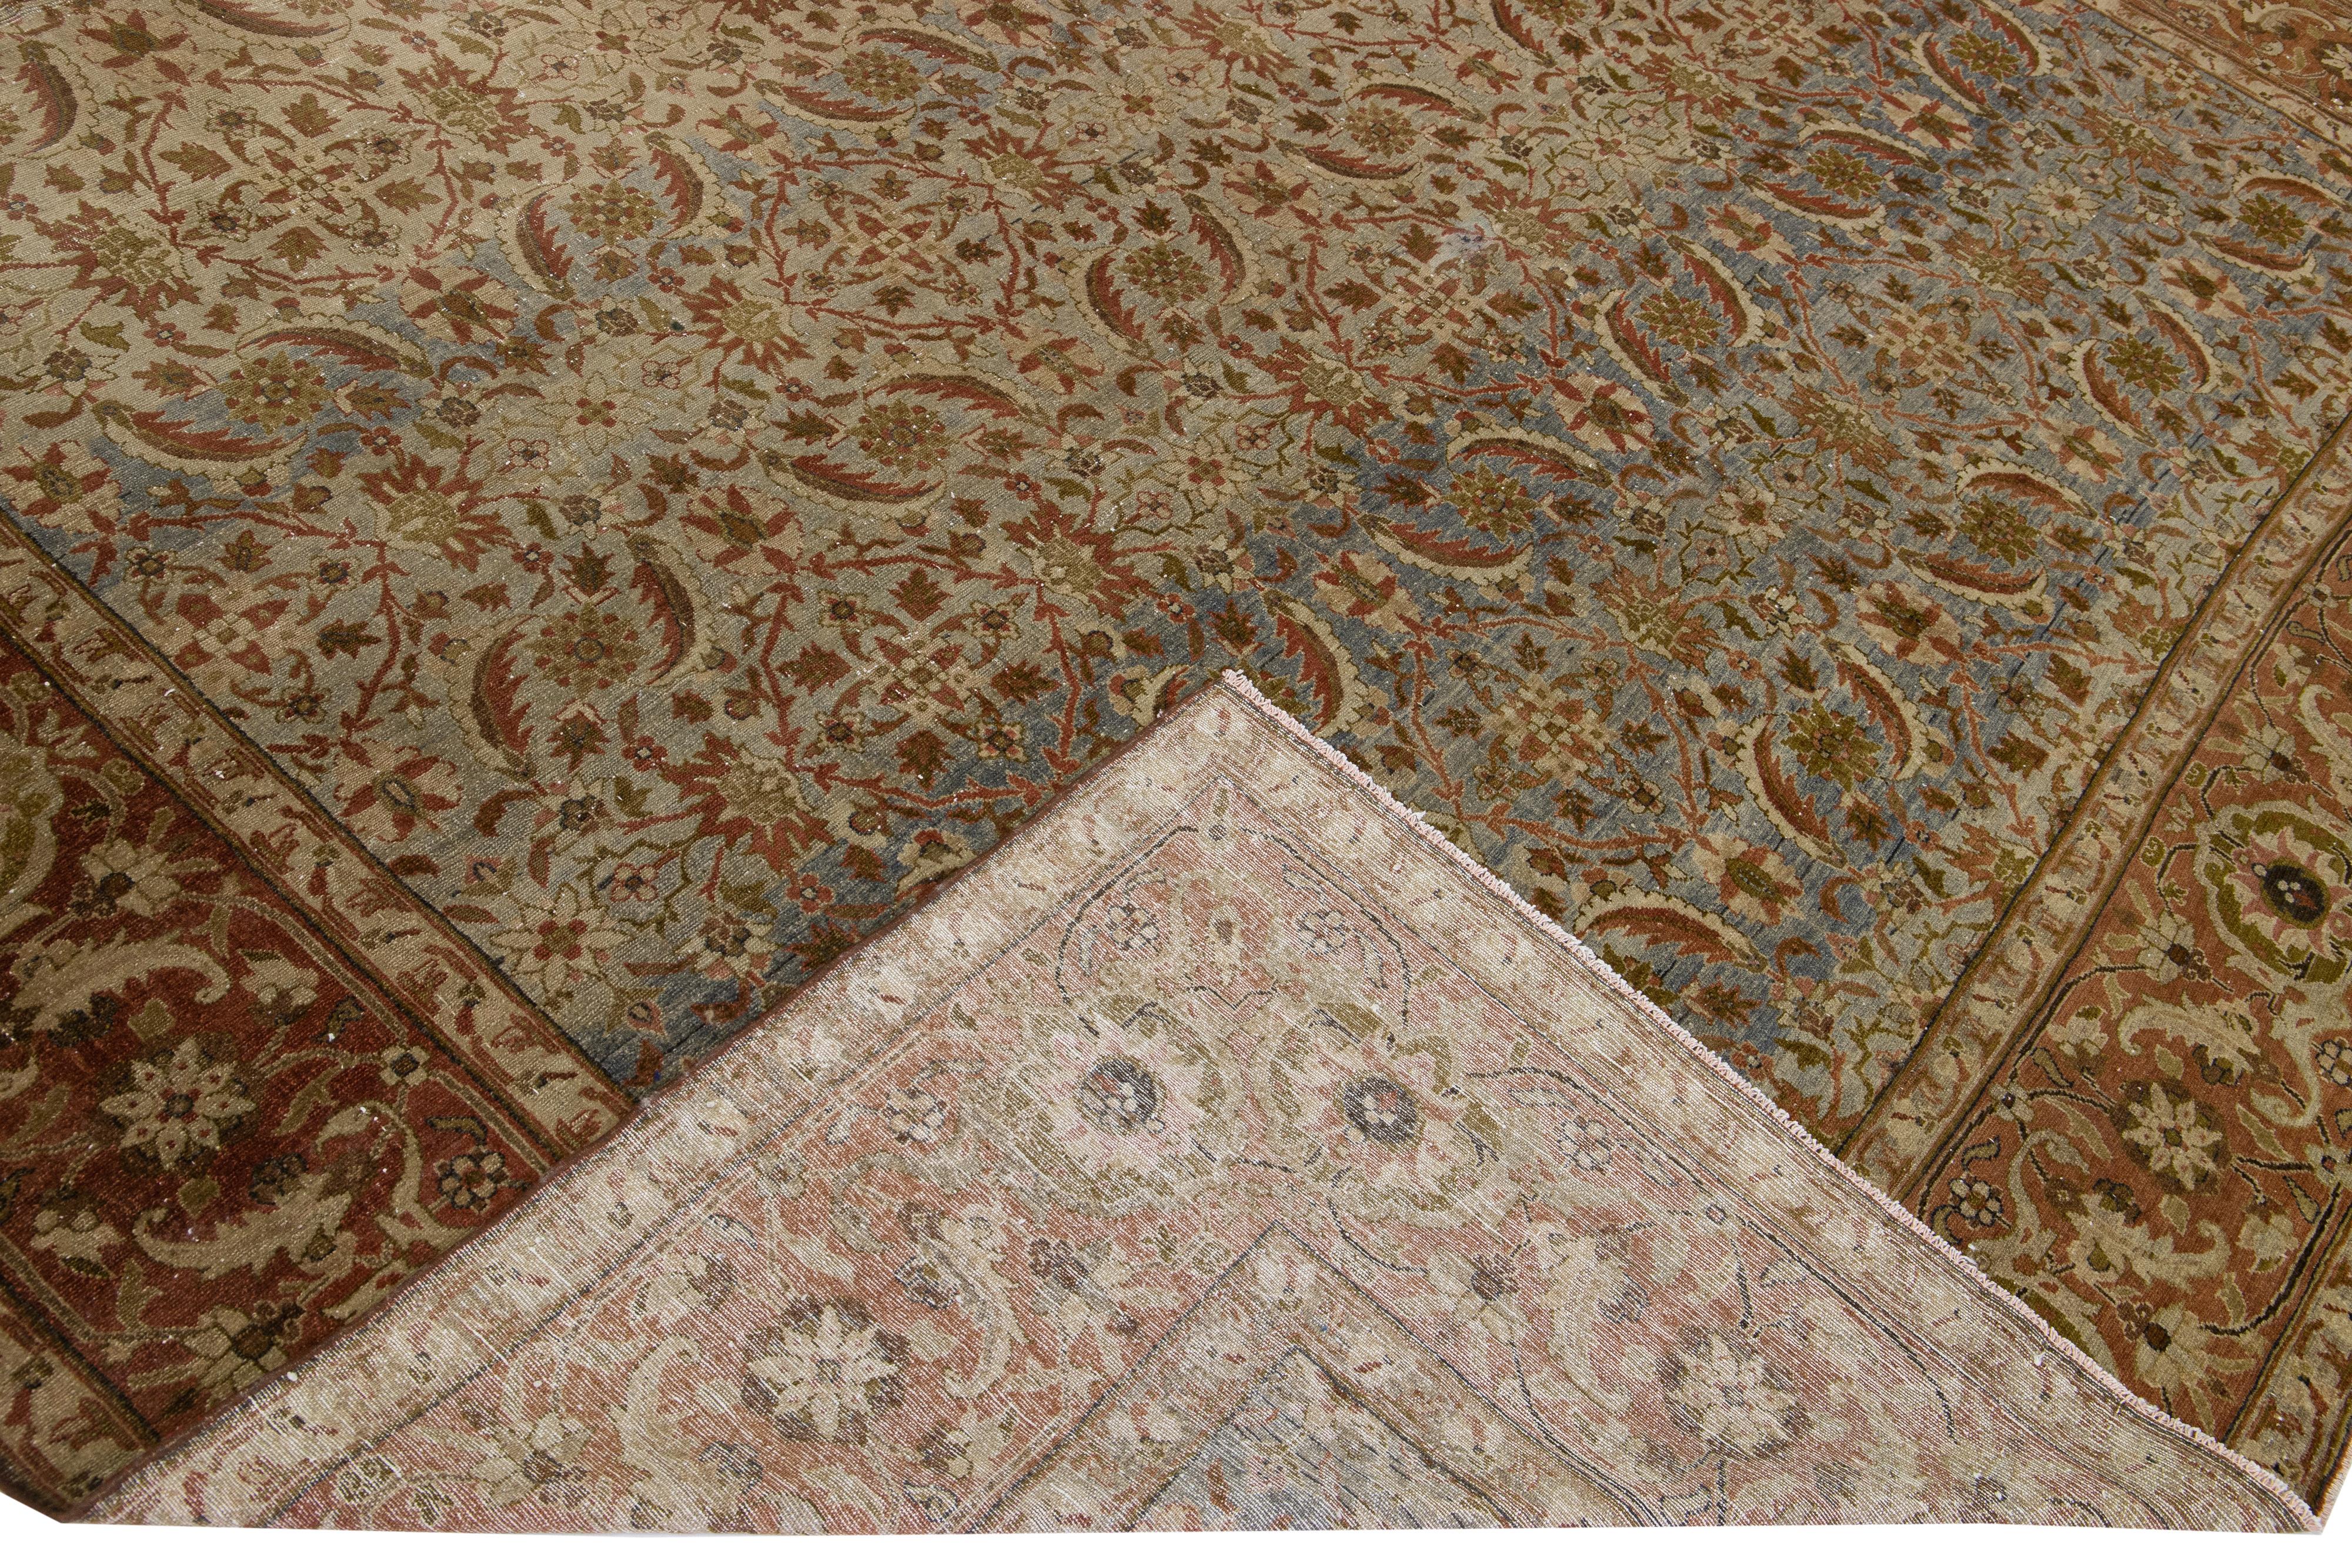 Beautiful antique Tabriz hand-knotted wool rug with a gray and tan field. This Persian piece has a designed frame with orange-rusted and green accent colors in the traditional all-over design. 

This rug measures: 11' x 16'.